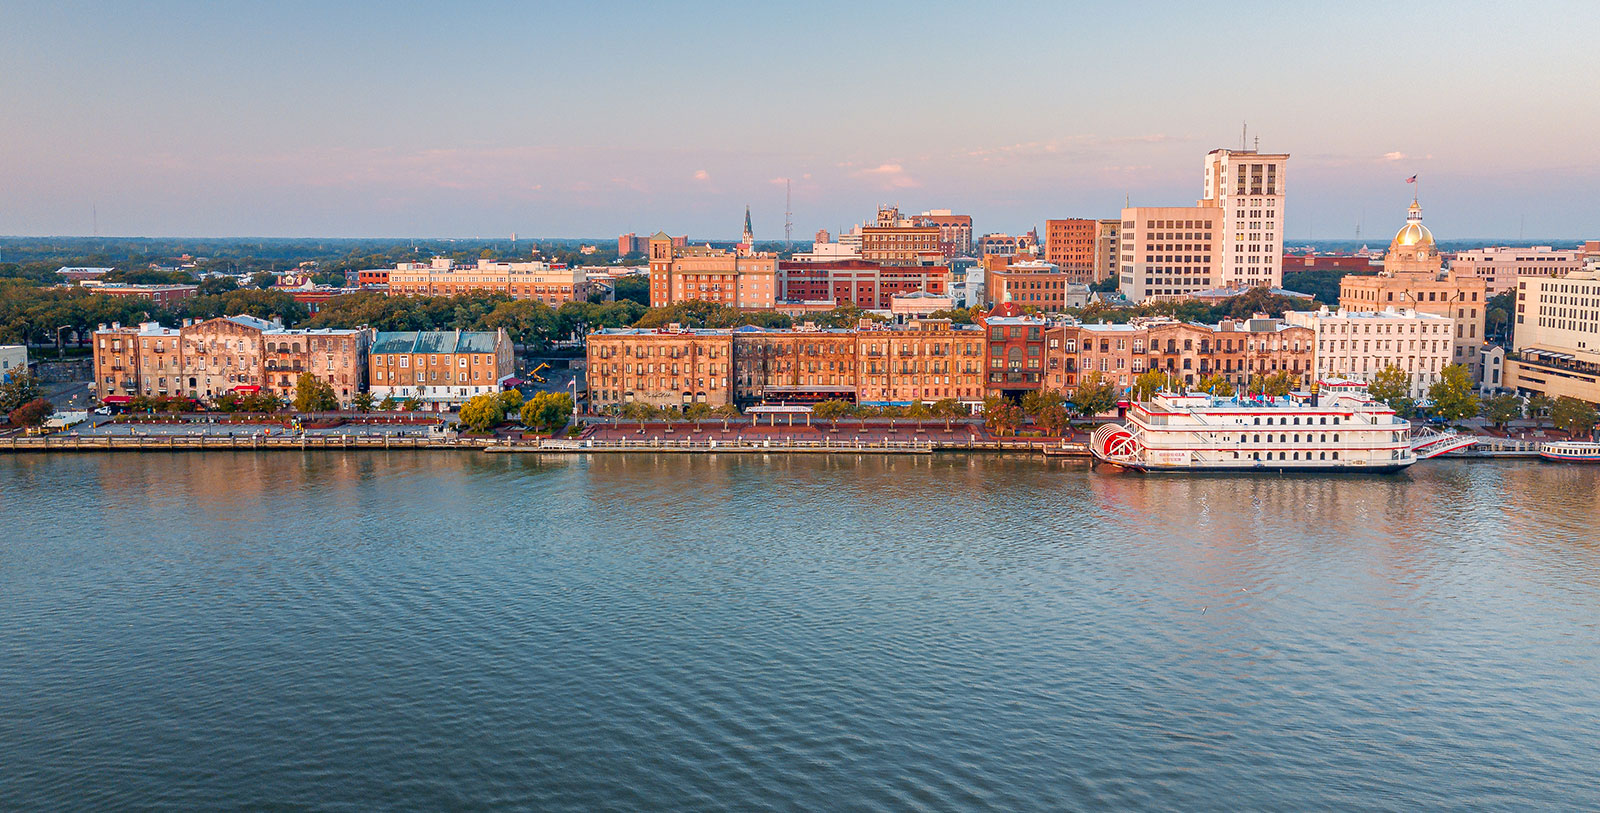 Experience Johnson Square, the Rousakis Riverfront Plaza, the Davenport House Museum, and the Juliette Gordon Low Birthplace nearby.